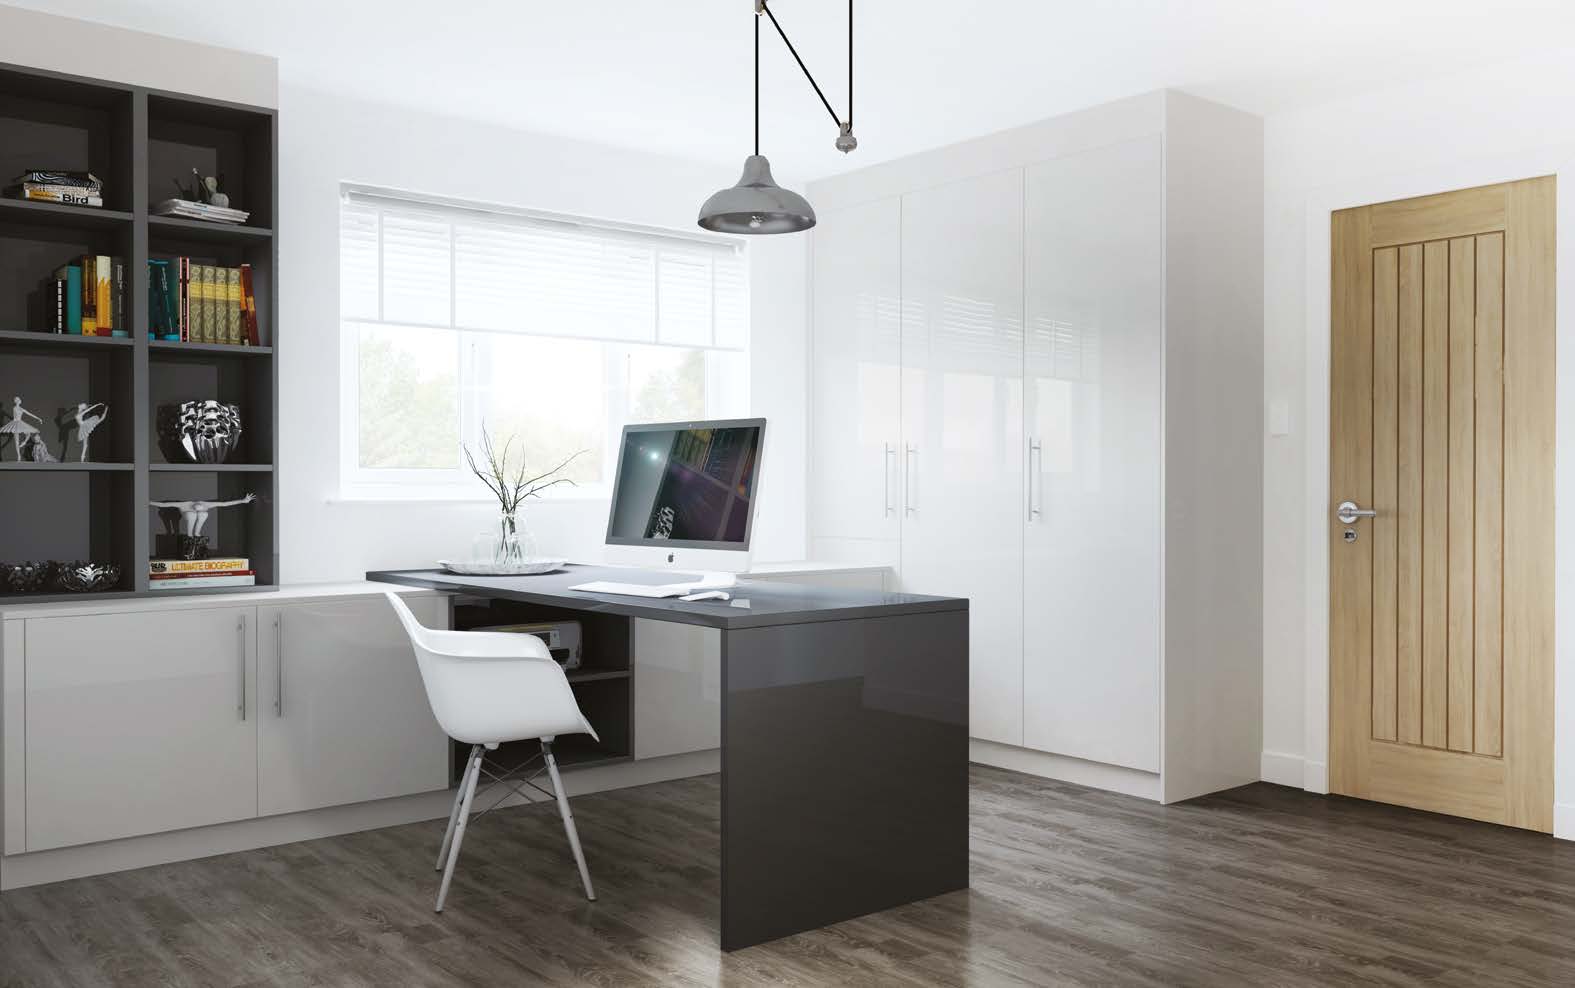 Are you home working during COVID - Twenty/20 Design can design a home office for you to keep productive